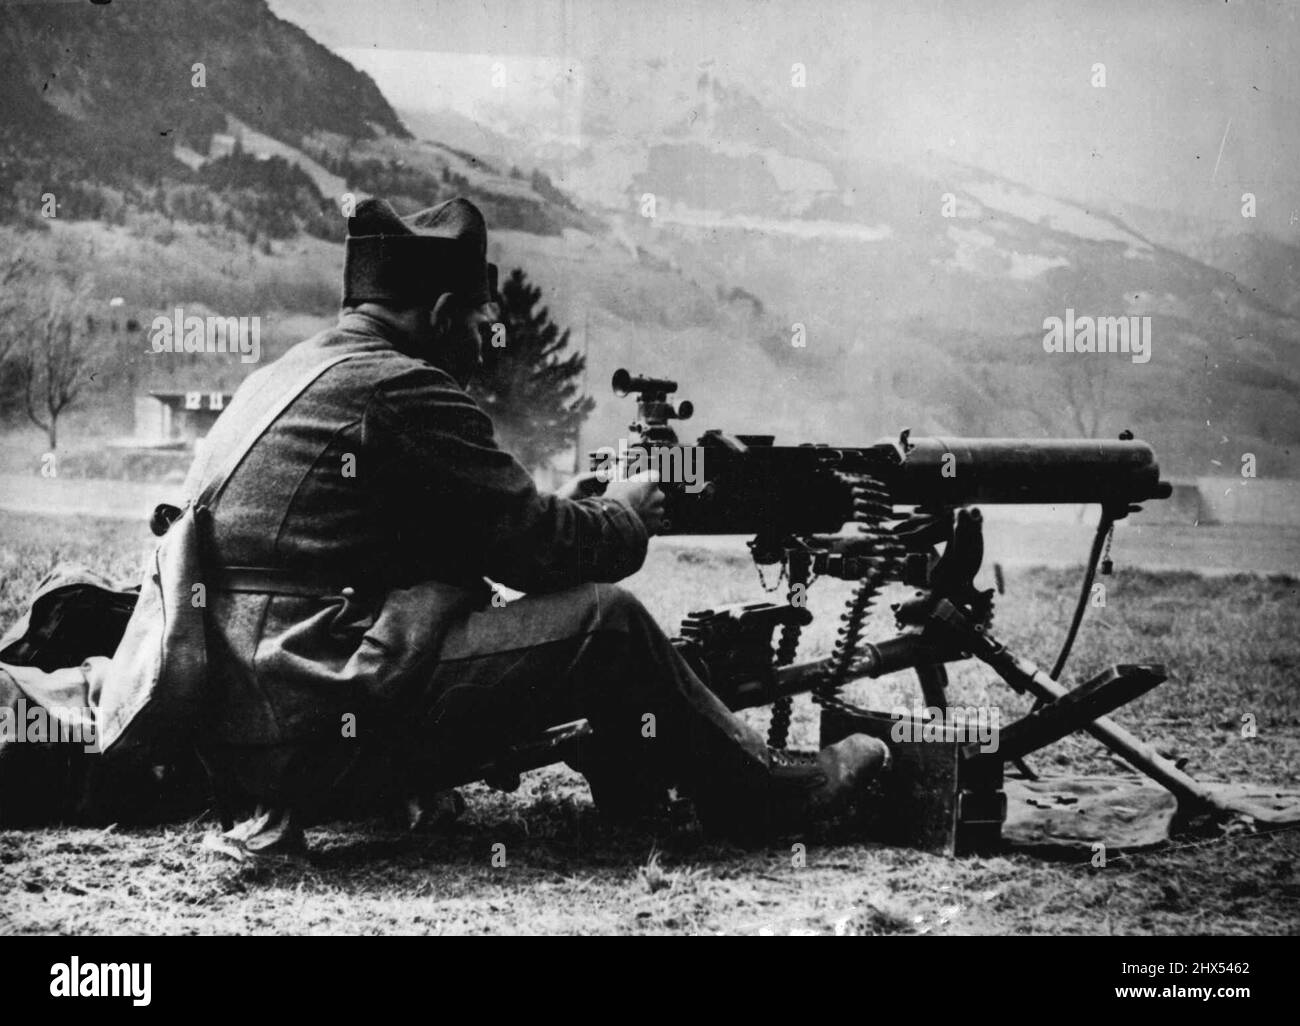 The Swiss Army Are Ready - A Machine gunner in position. Switzerland has joined the small neutrals in keeping strict watch on her Frontiers. Swiss Fortifications are being rapidly erected, and a large scale call-up has brought her Army in the field up to 200,000. April 28, 1940. (Photo by Sport & General Press Agency, Limited). Stock Photo